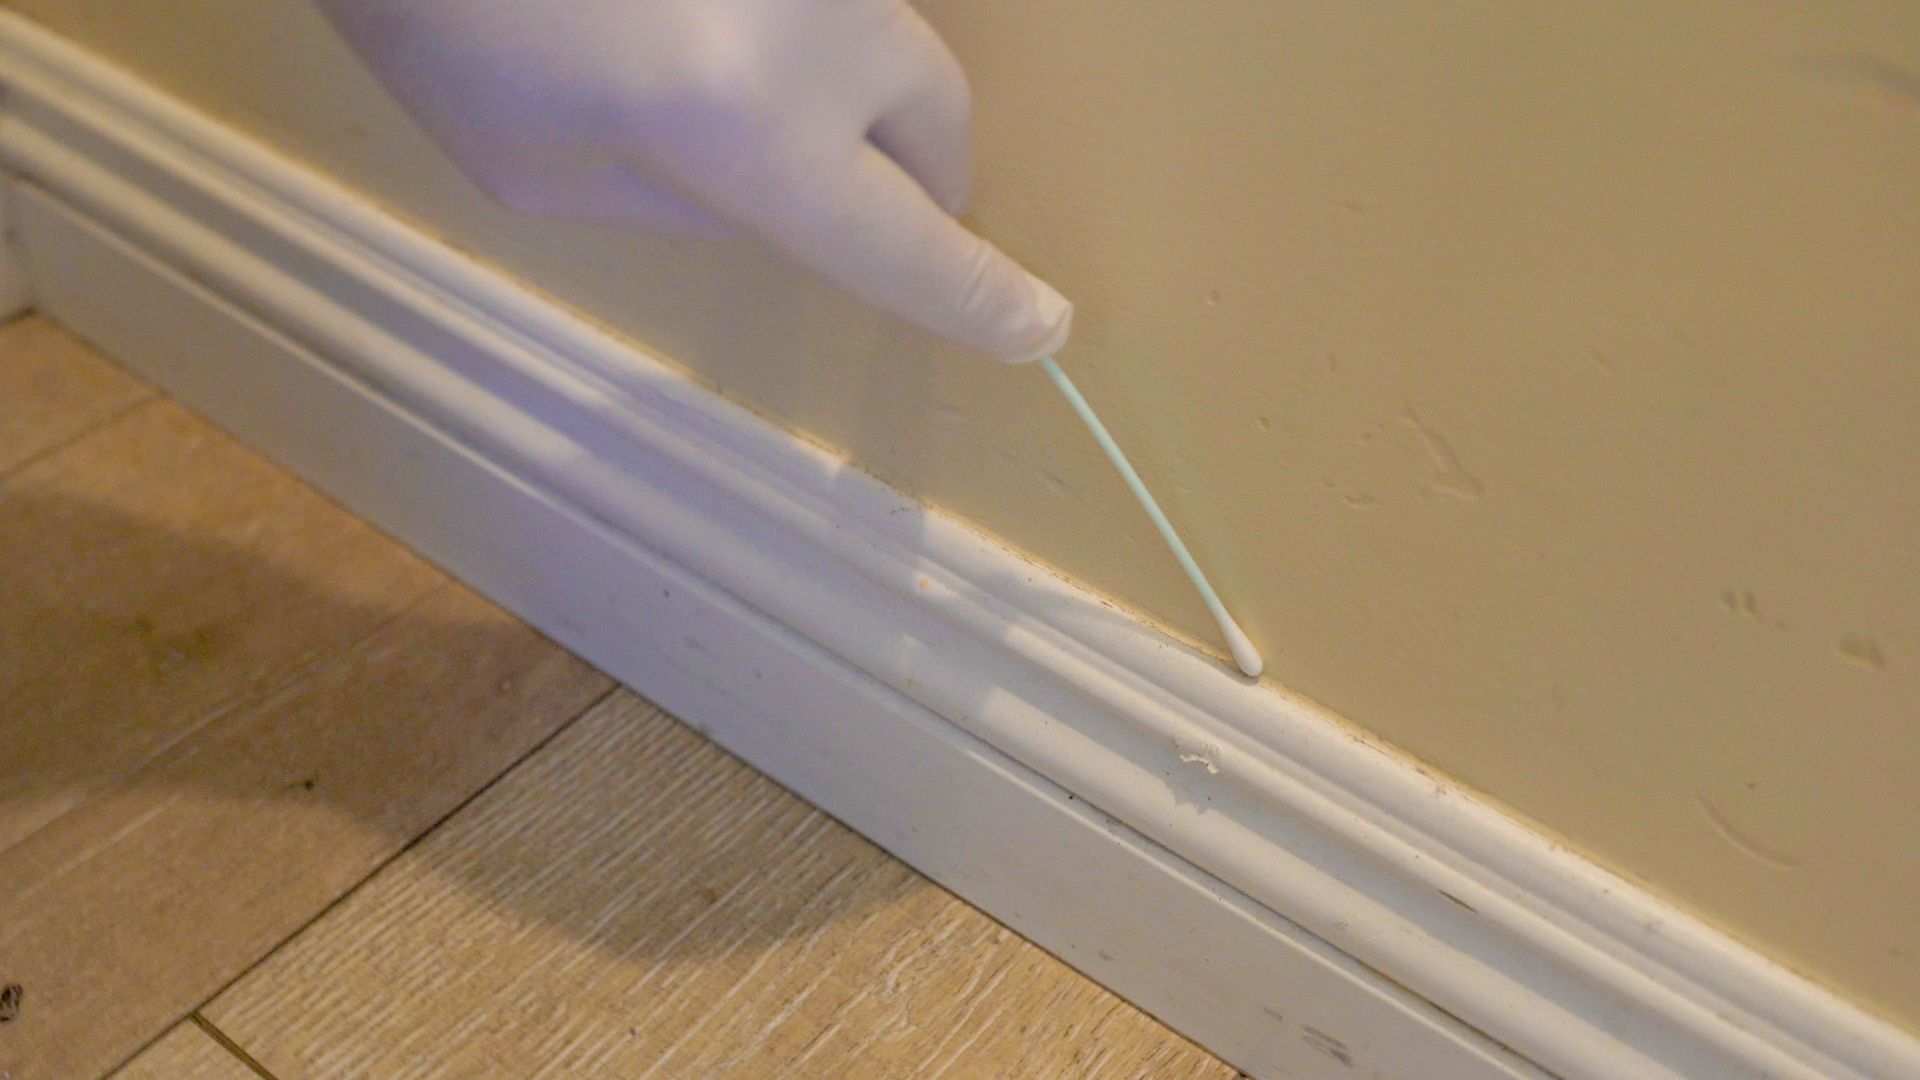 A person is cleaning a wall with a cotton swab